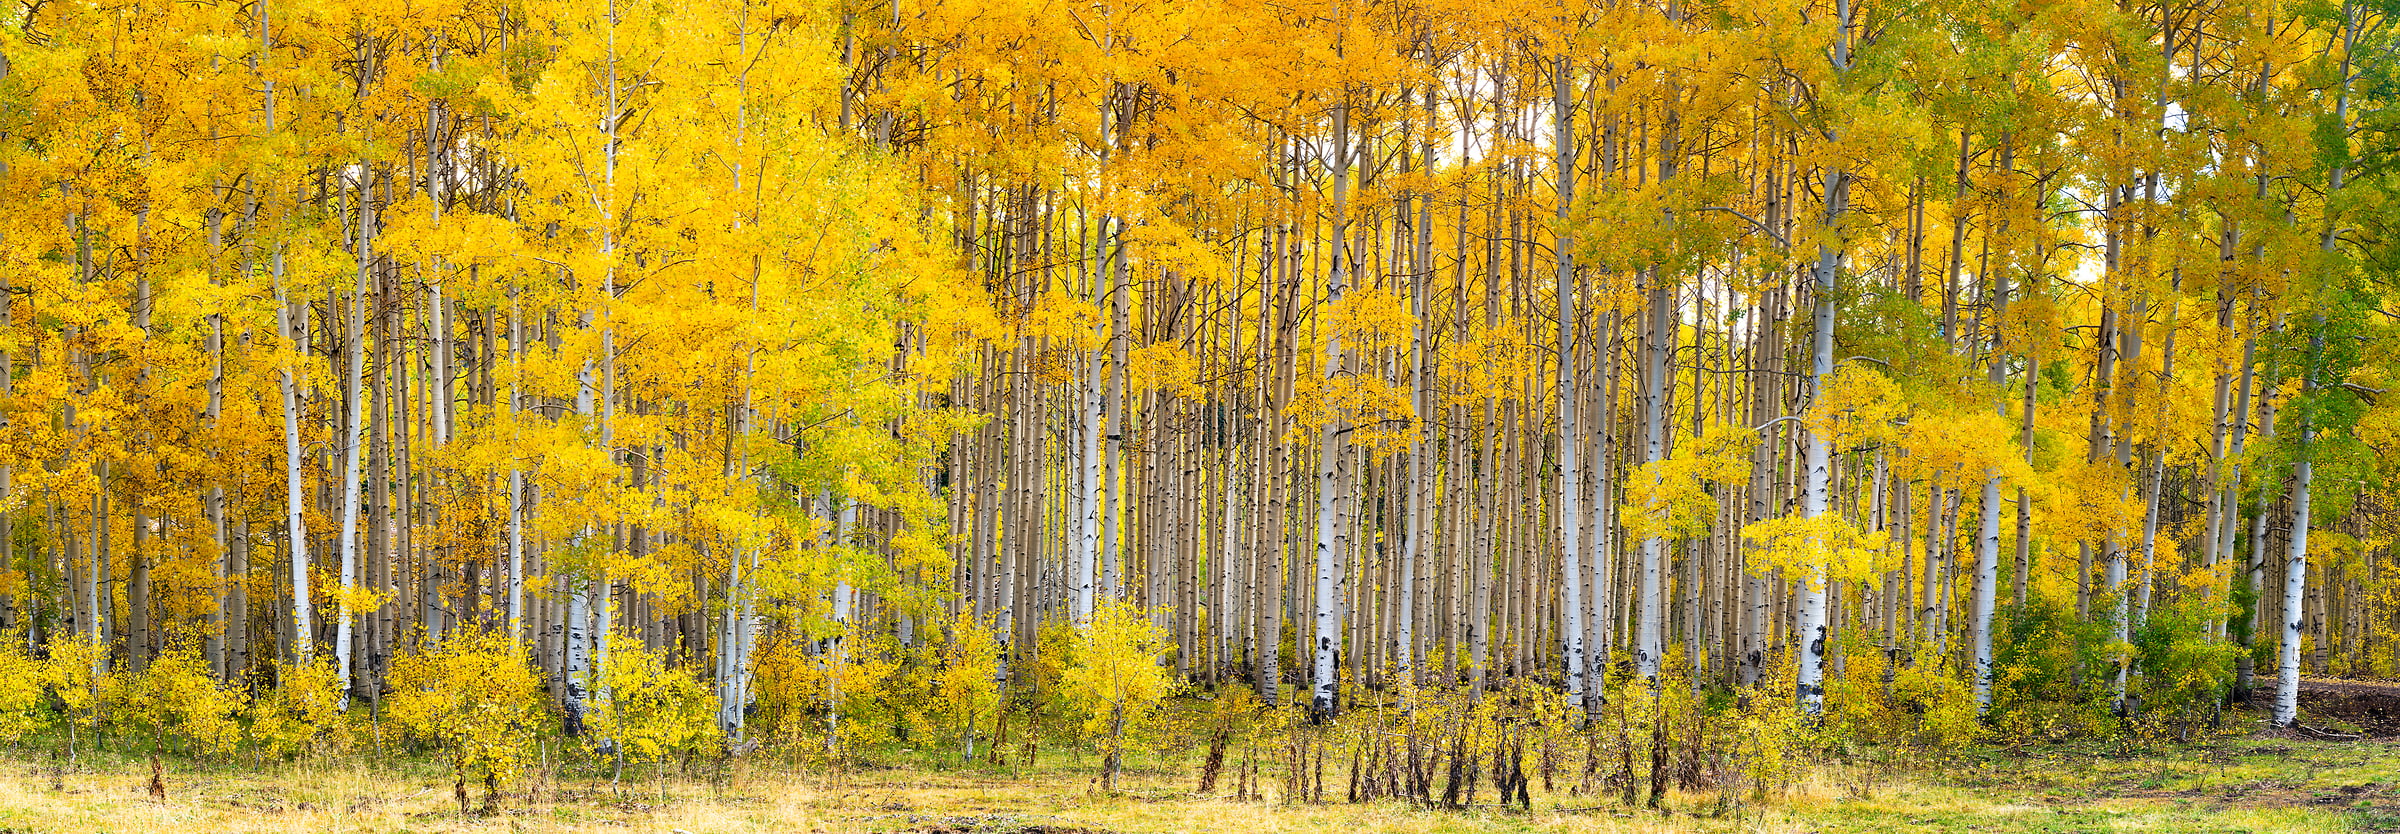 632 megapixels! A very high resolution, wallpaper photo of a forest of aspen trees in autumn; nature photograph created by Phillip Noll in Mancos, Colorado.